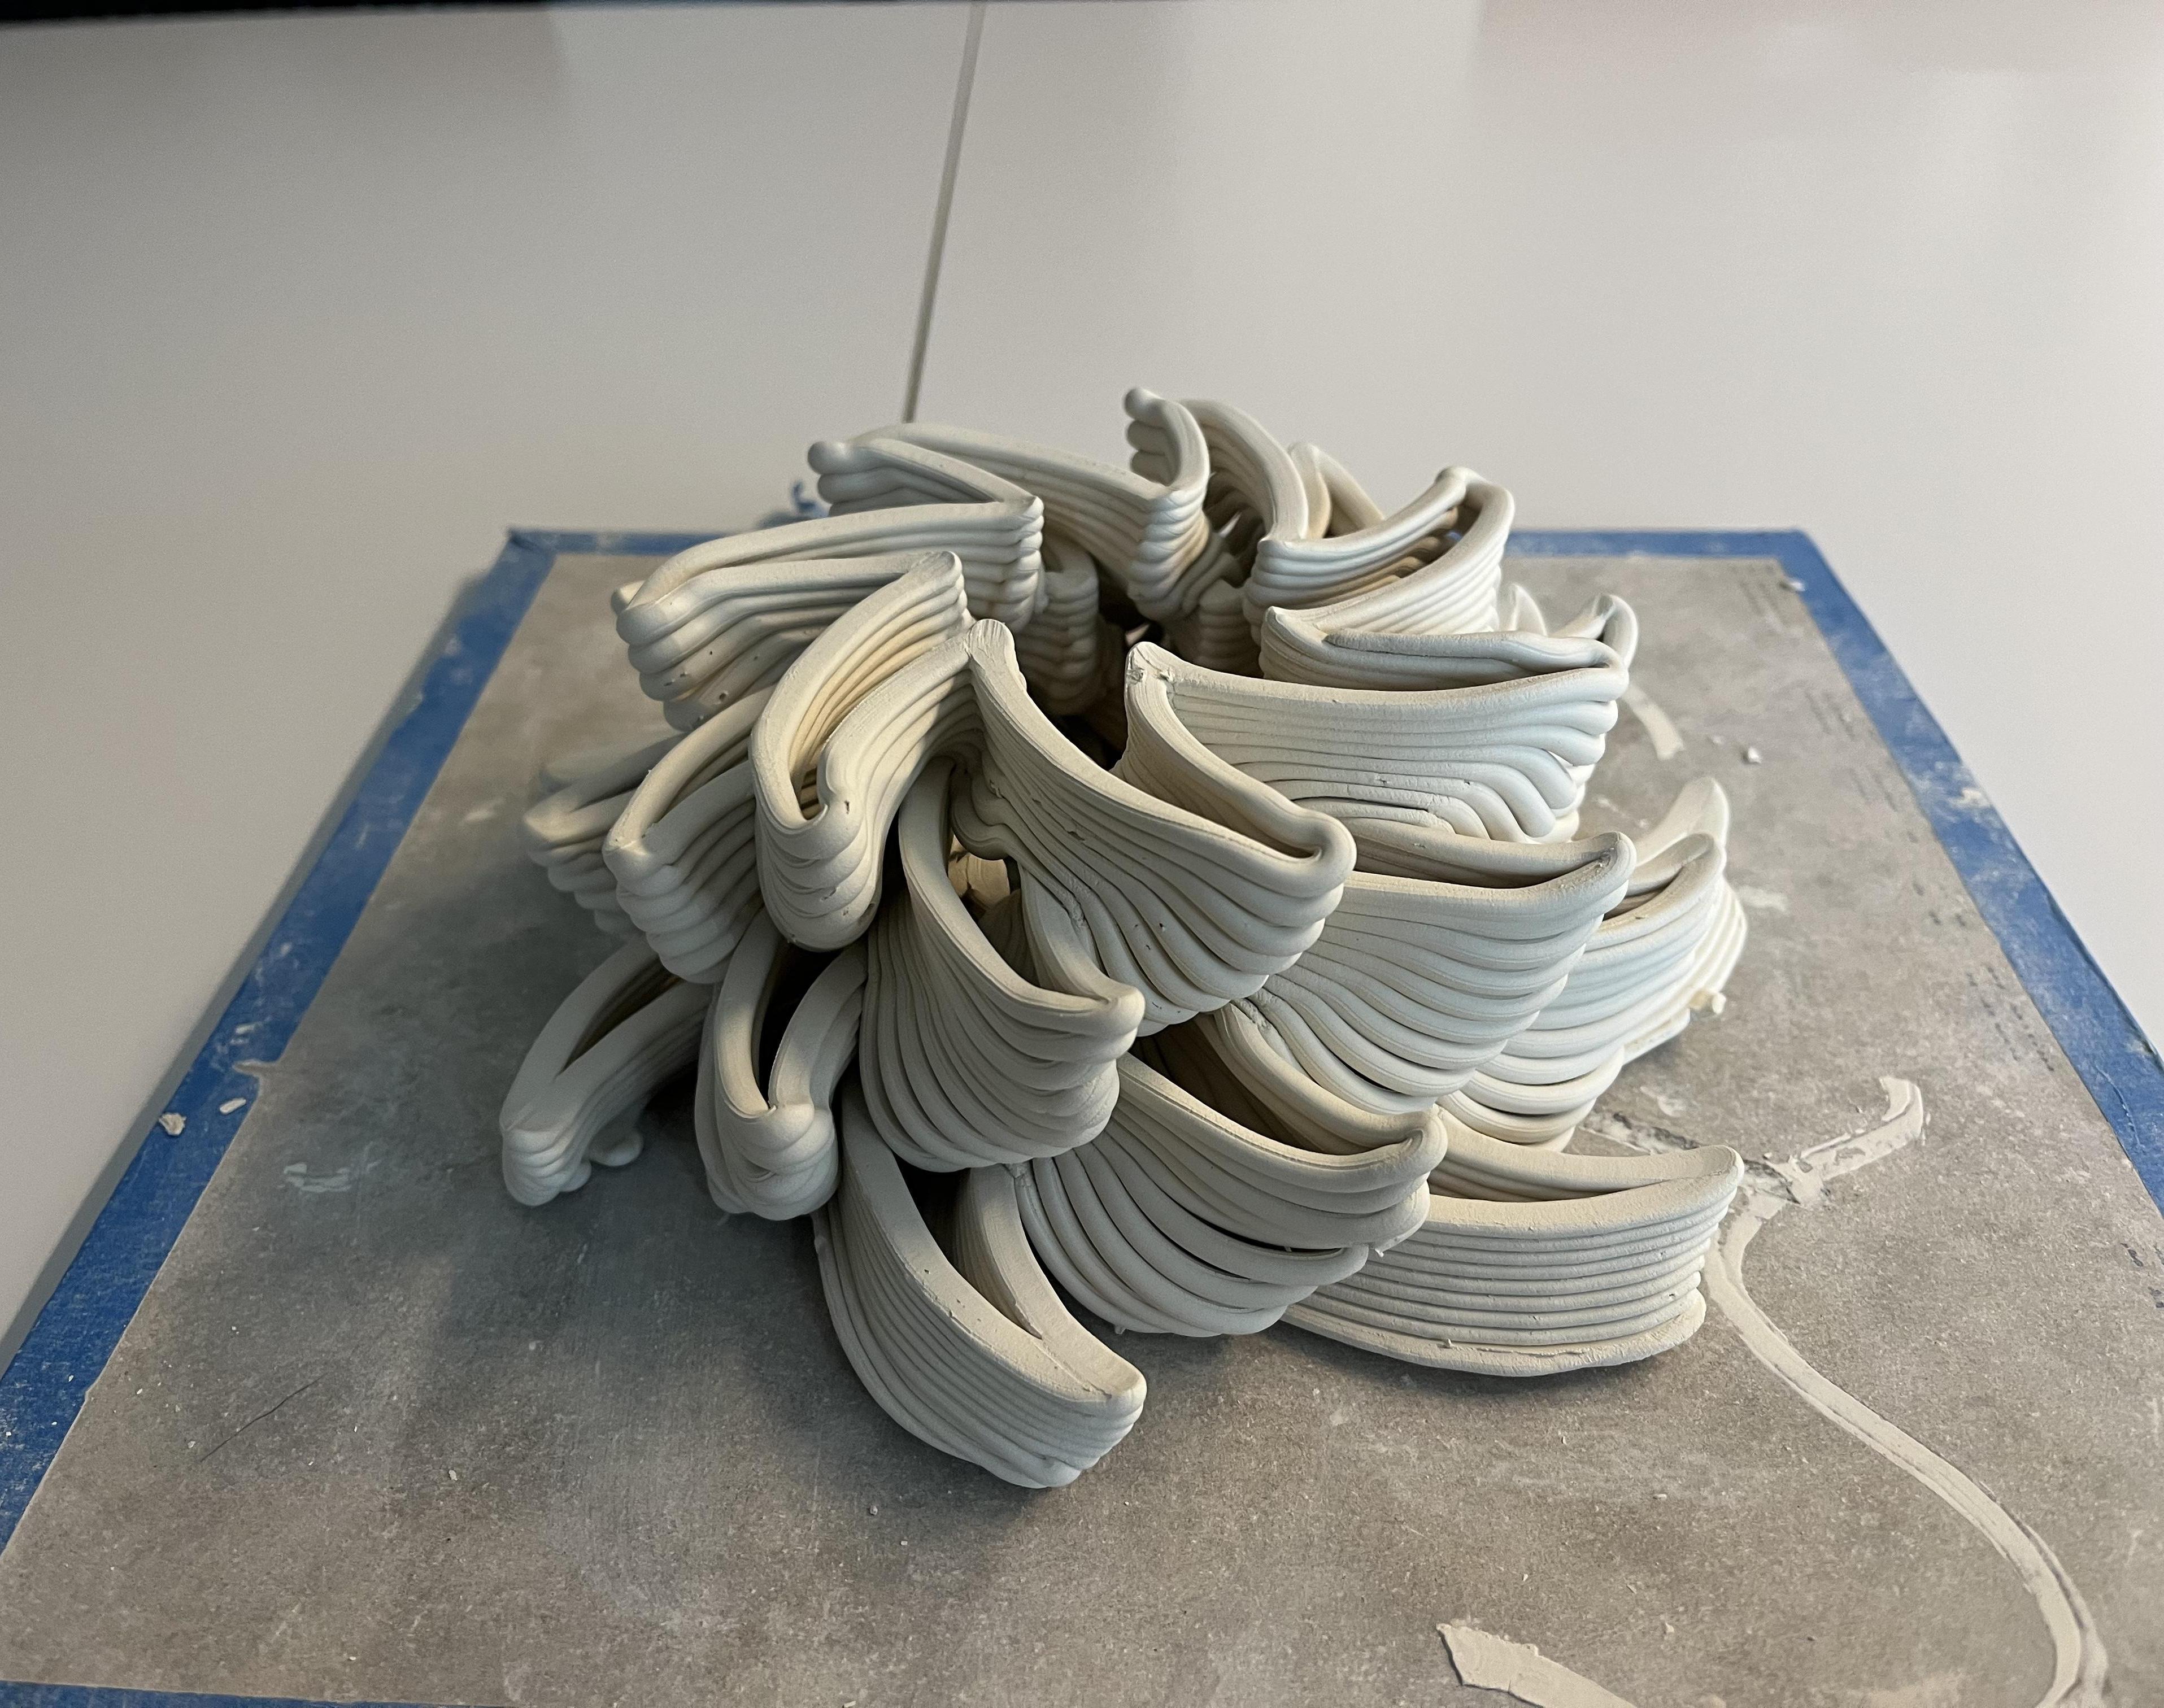 Clay 3D Printing Experiment